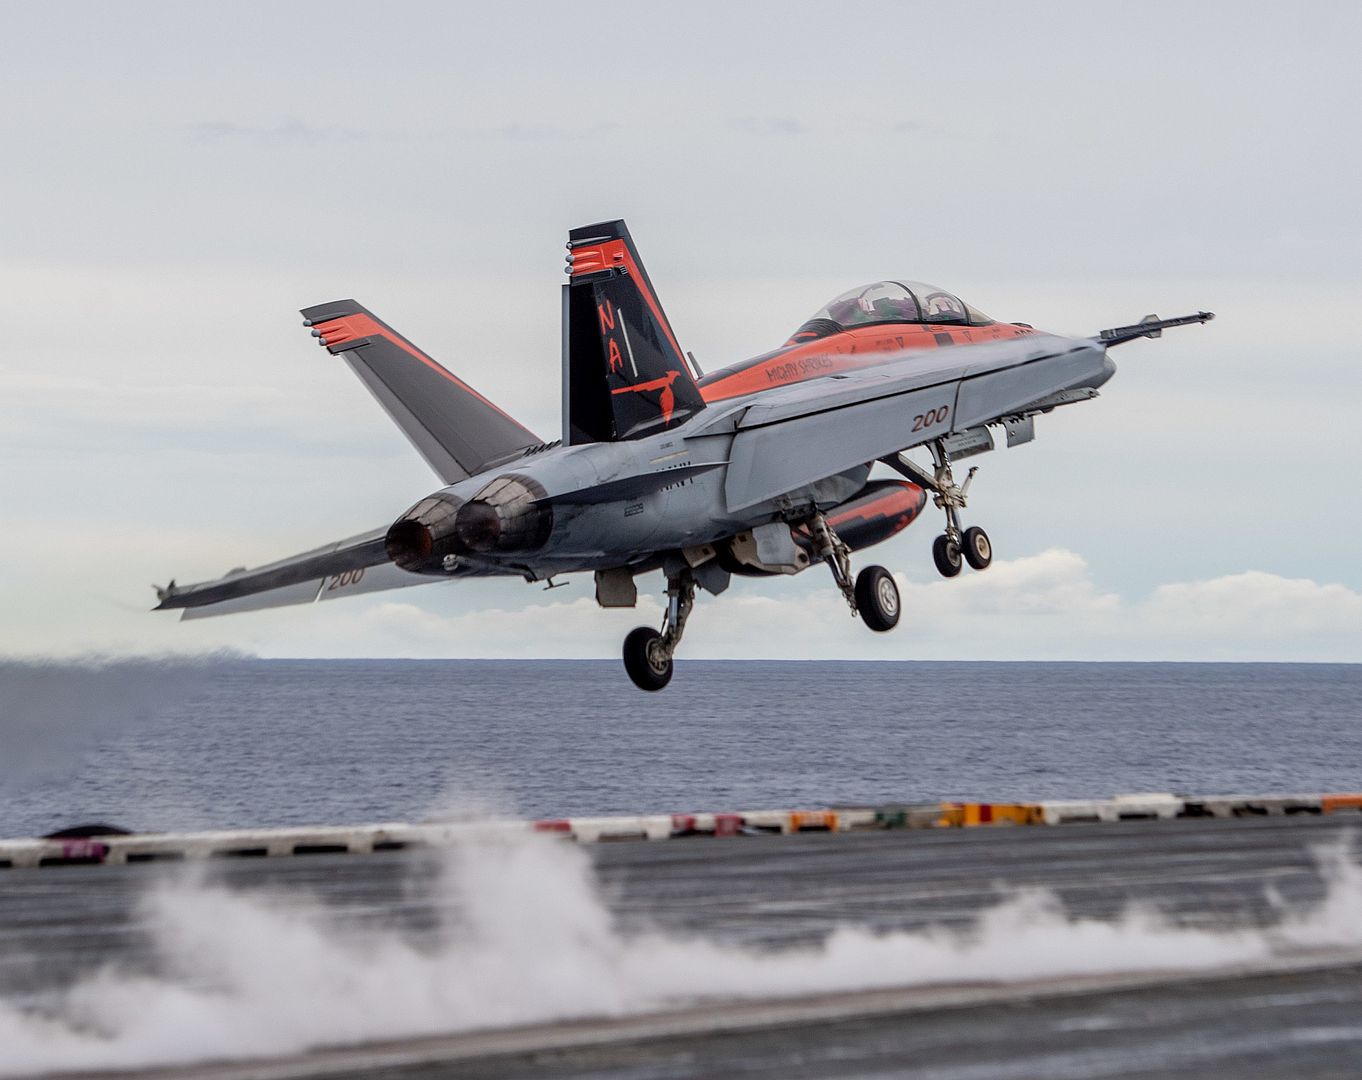  94 Launches From The Aircraft Carrier USS Nimitz